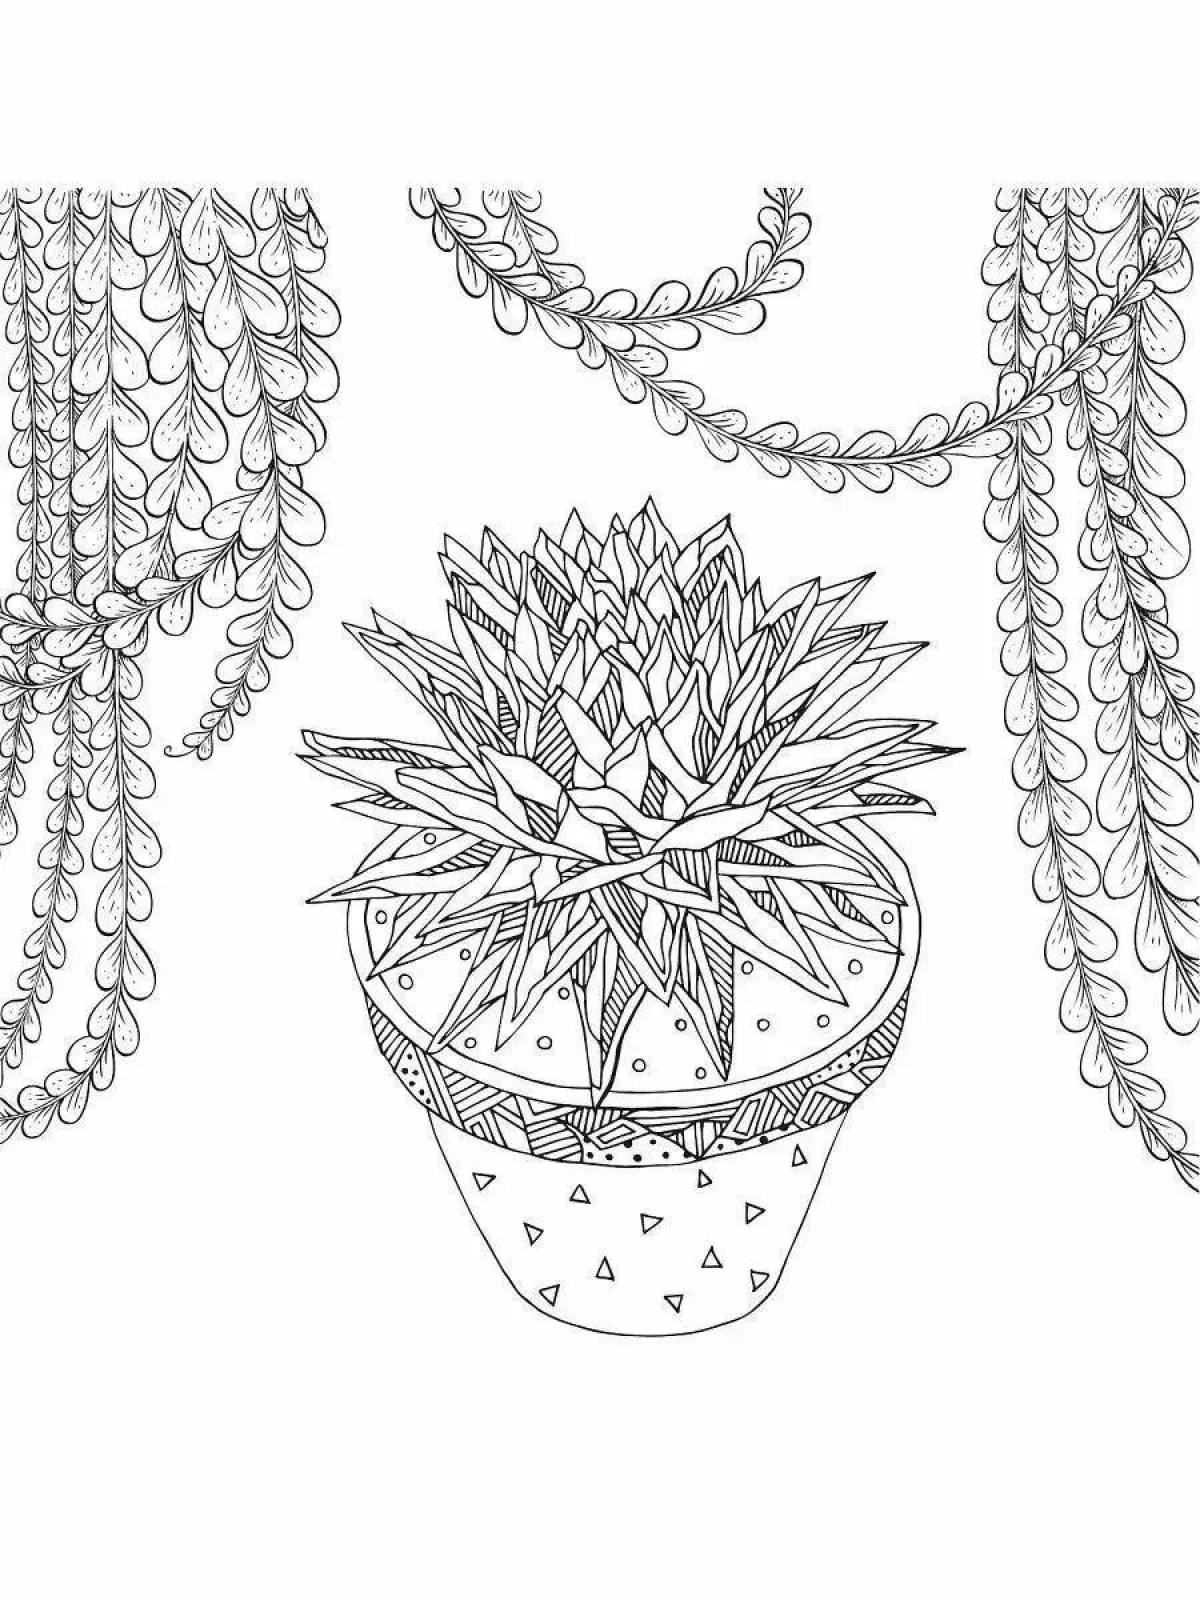 Cactus coloring page